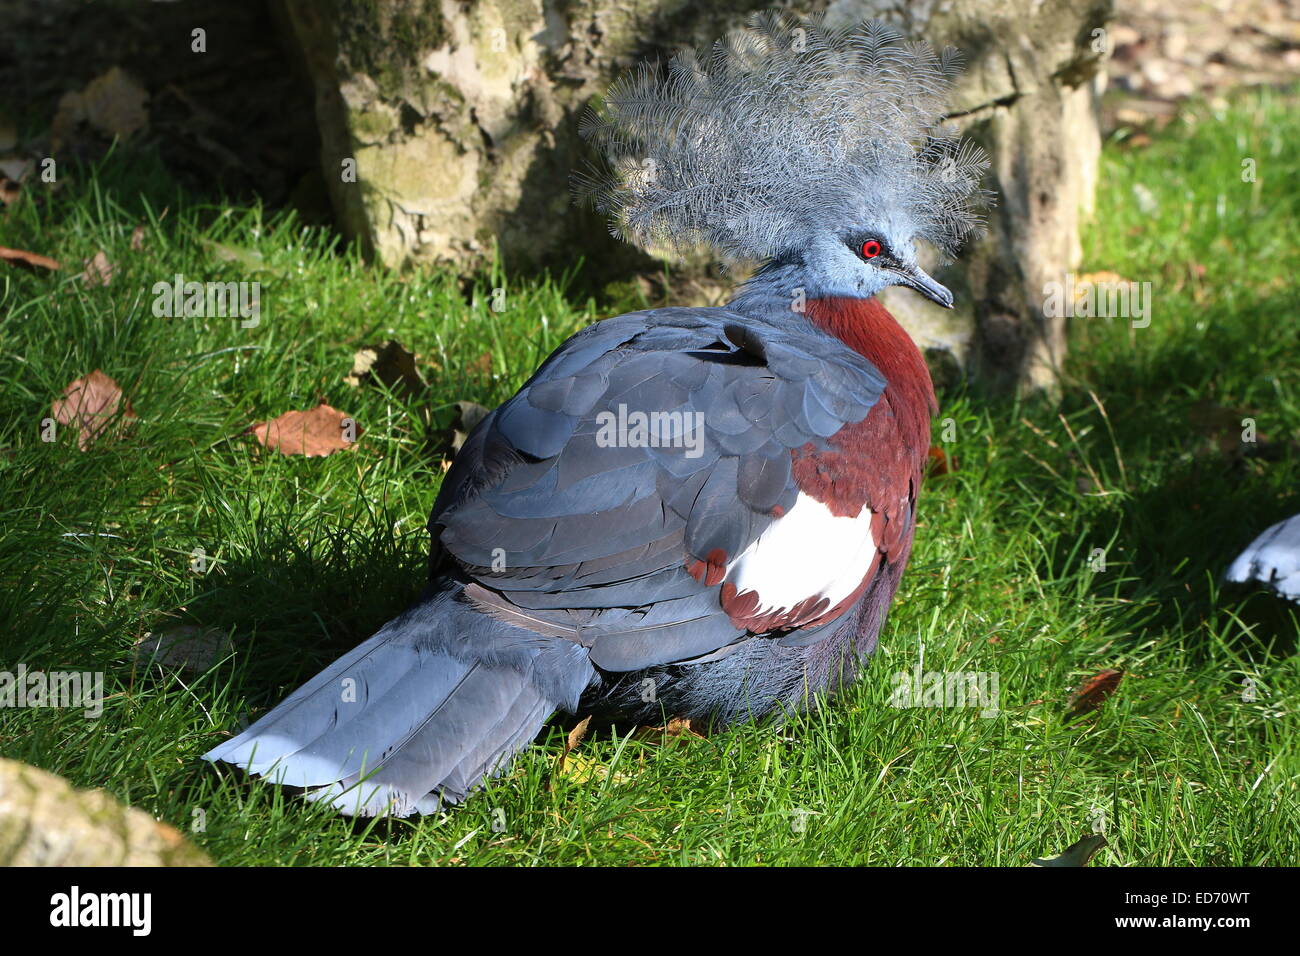 Male Victoria Crowned Pigeon (Goura victoria) in a natural setting Stock Photo